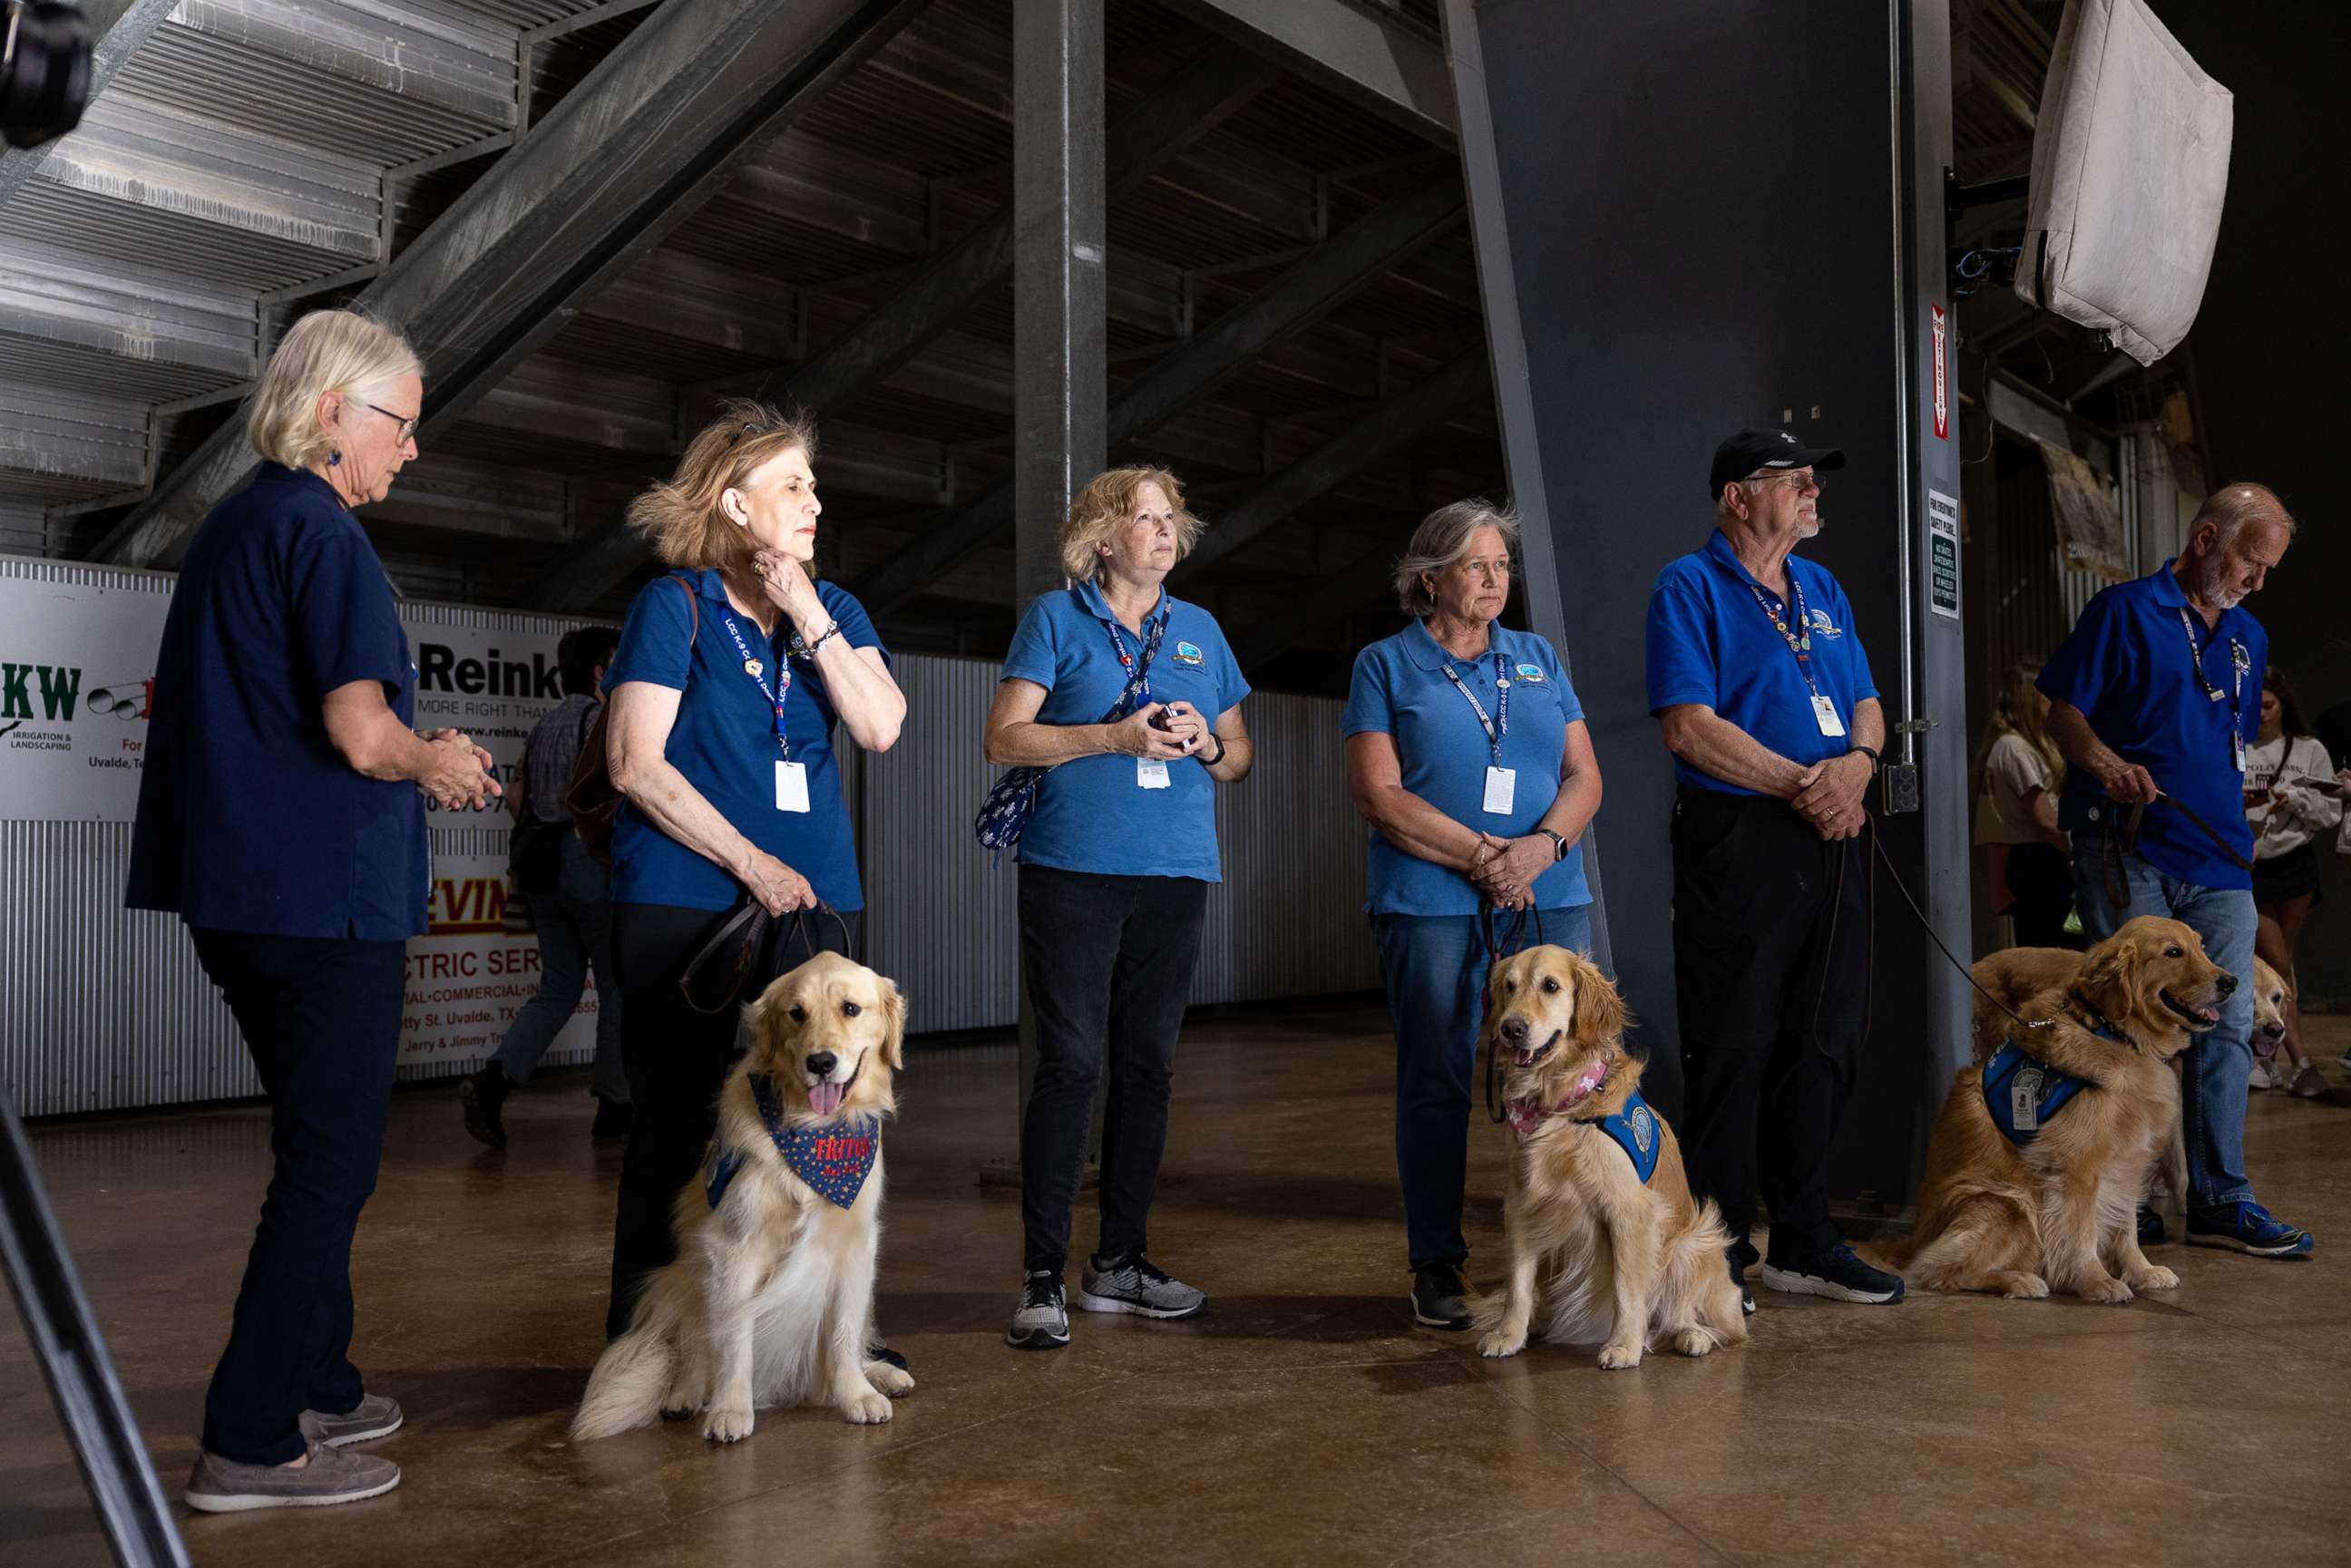 PHOTO: Volunteers with comfort dogs from Lutheran Church Charities offer their services to mourners at a vigil, May 25, 2022, for the 21 people killed at Robb Elementary School on May 24 in Uvalde, Texas.